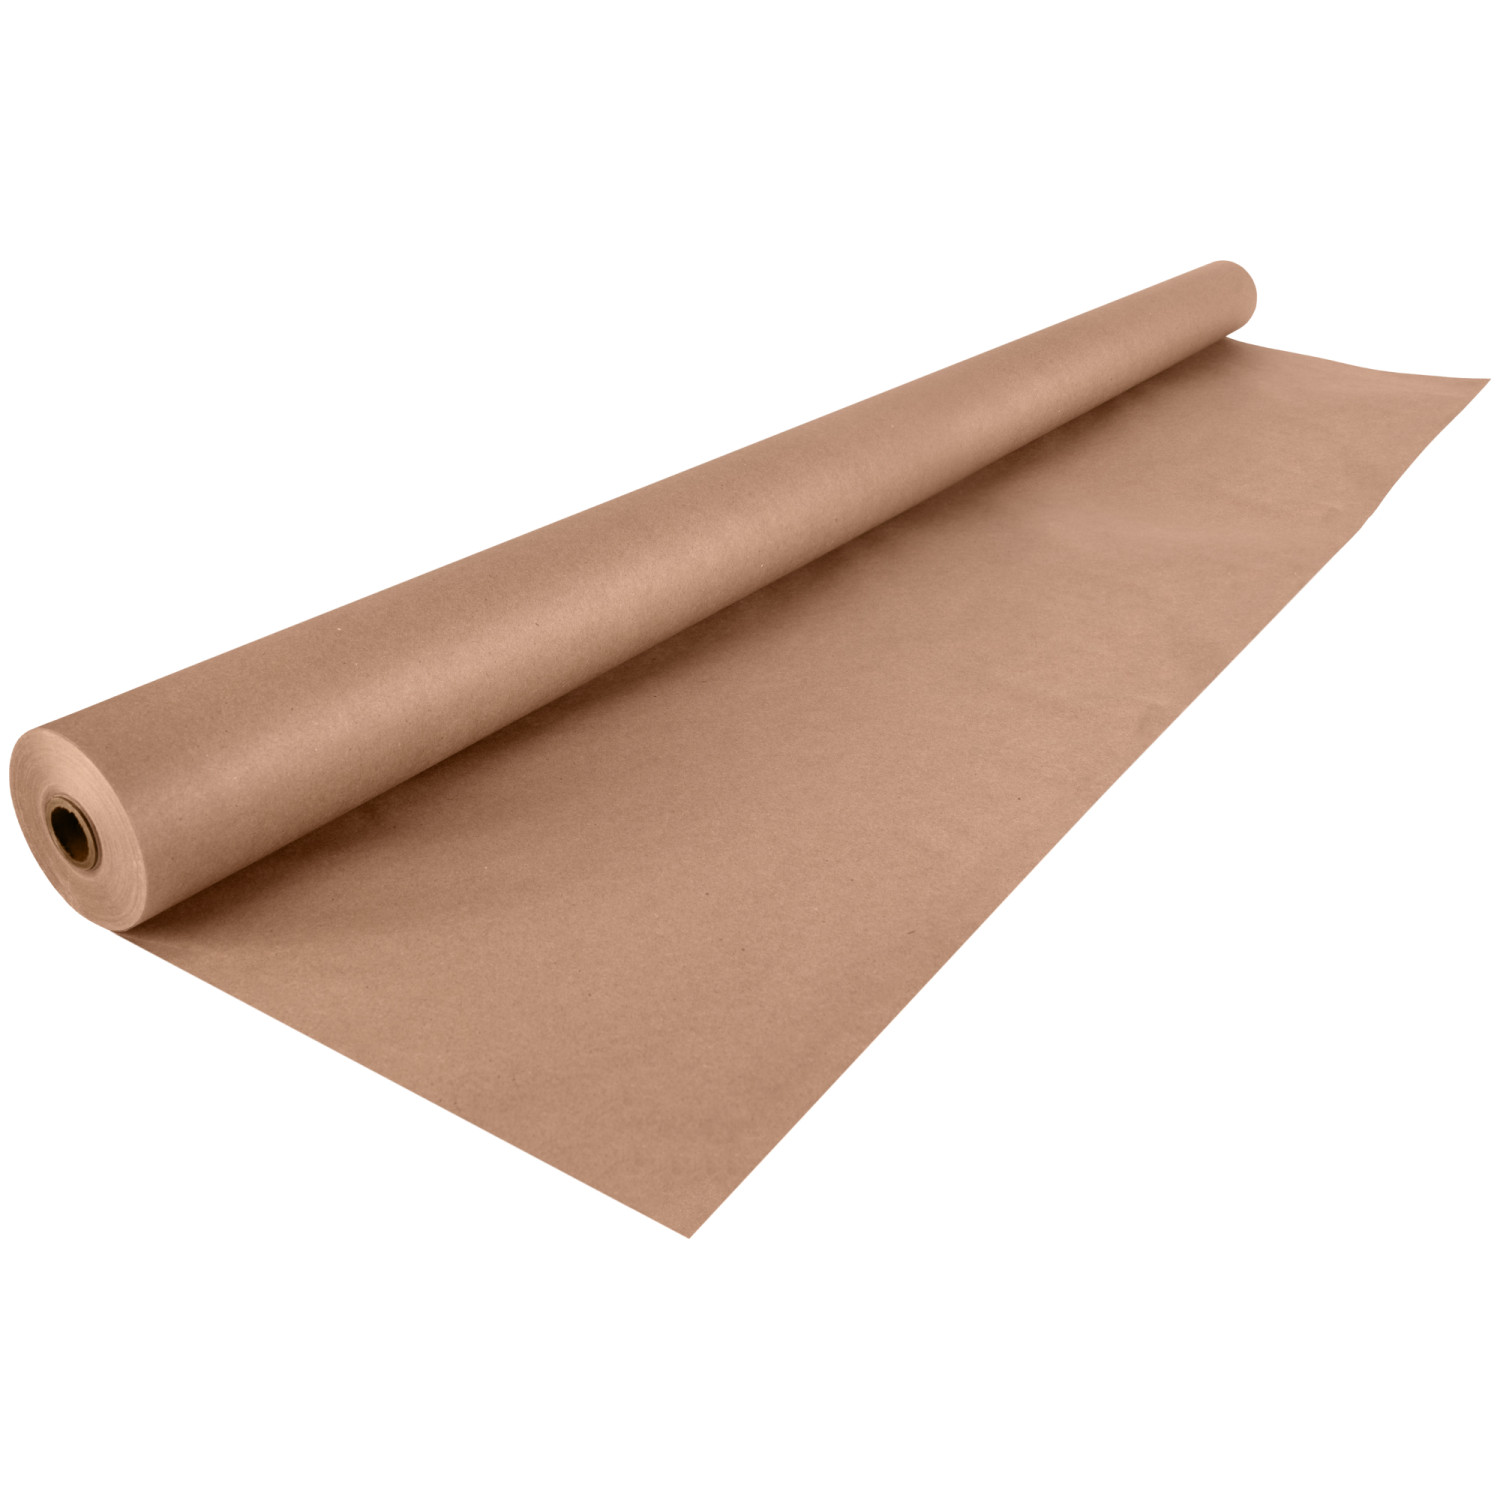 Black Kraft Arts and Crafts Paper Roll - 12 inches by 150 Feet